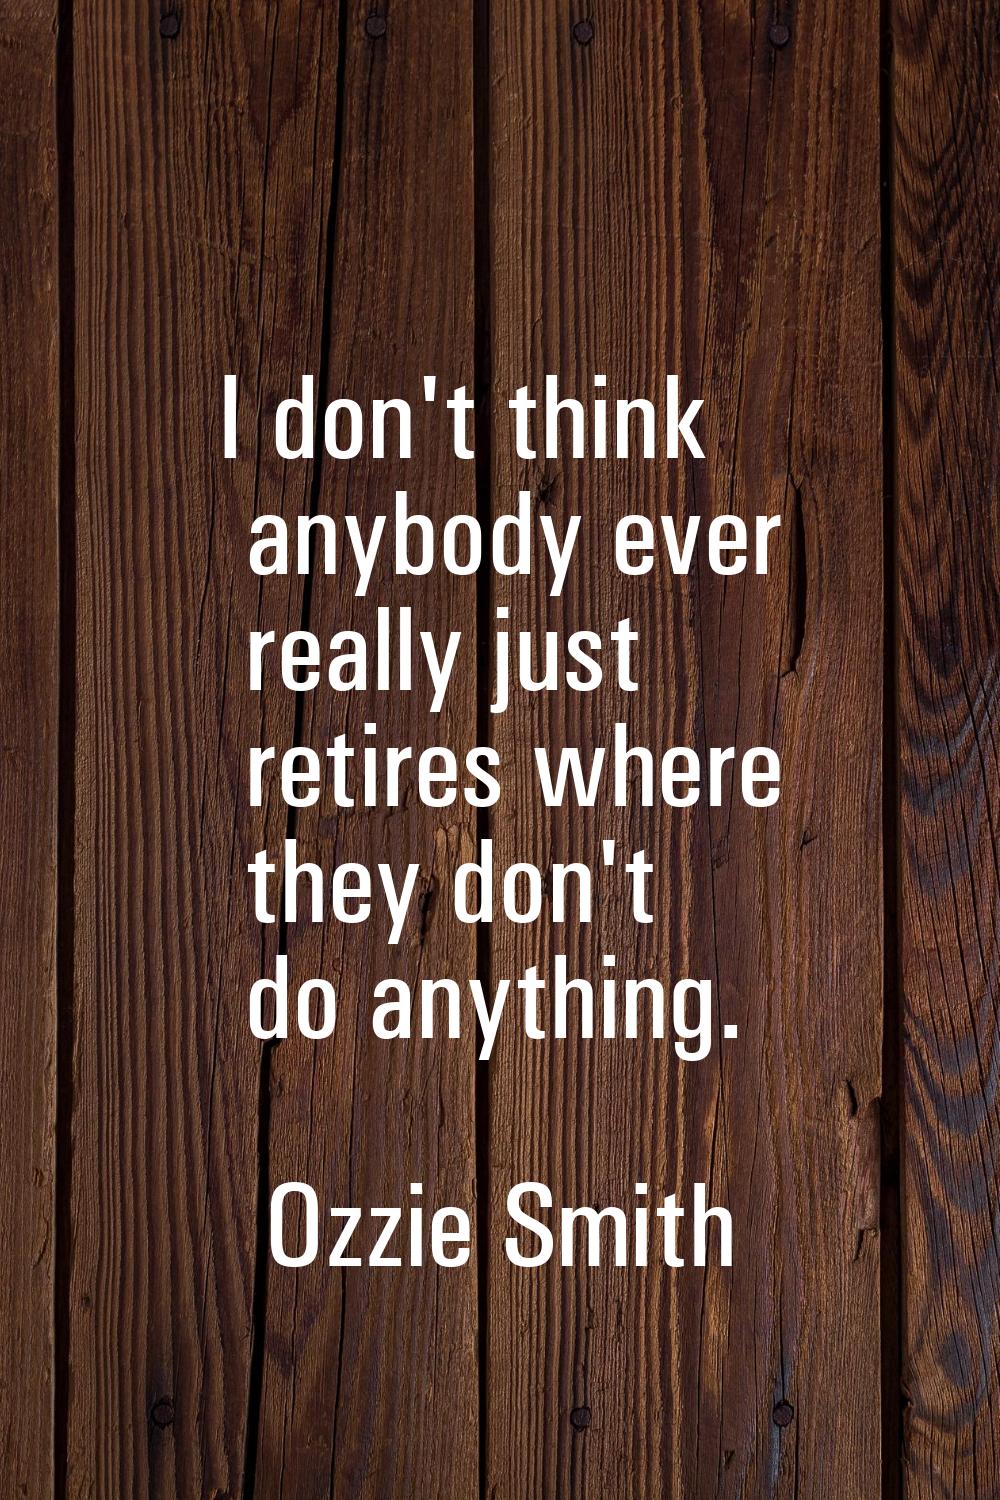 I don't think anybody ever really just retires where they don't do anything.